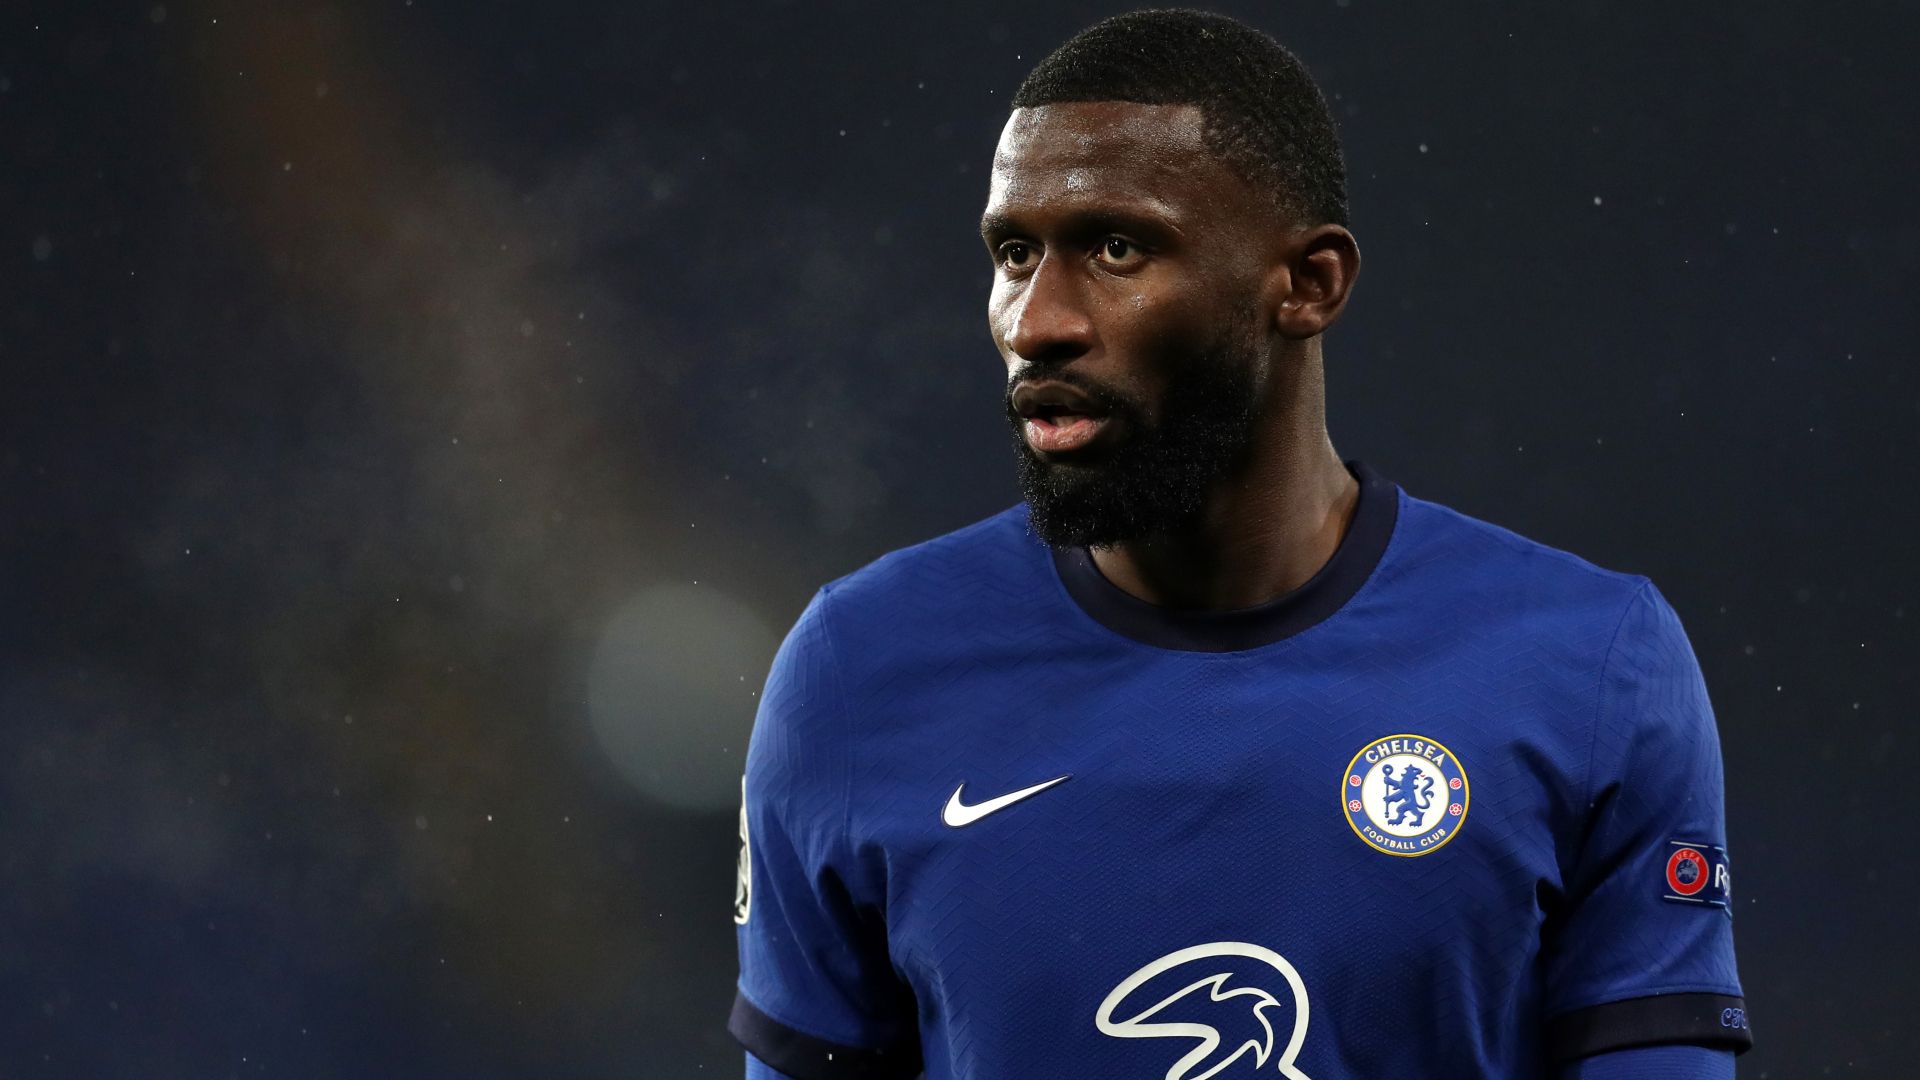 Toni is a big bro to all of us' dismisses Rudiger rumours as 'complete nonsense' after Lampard sacking